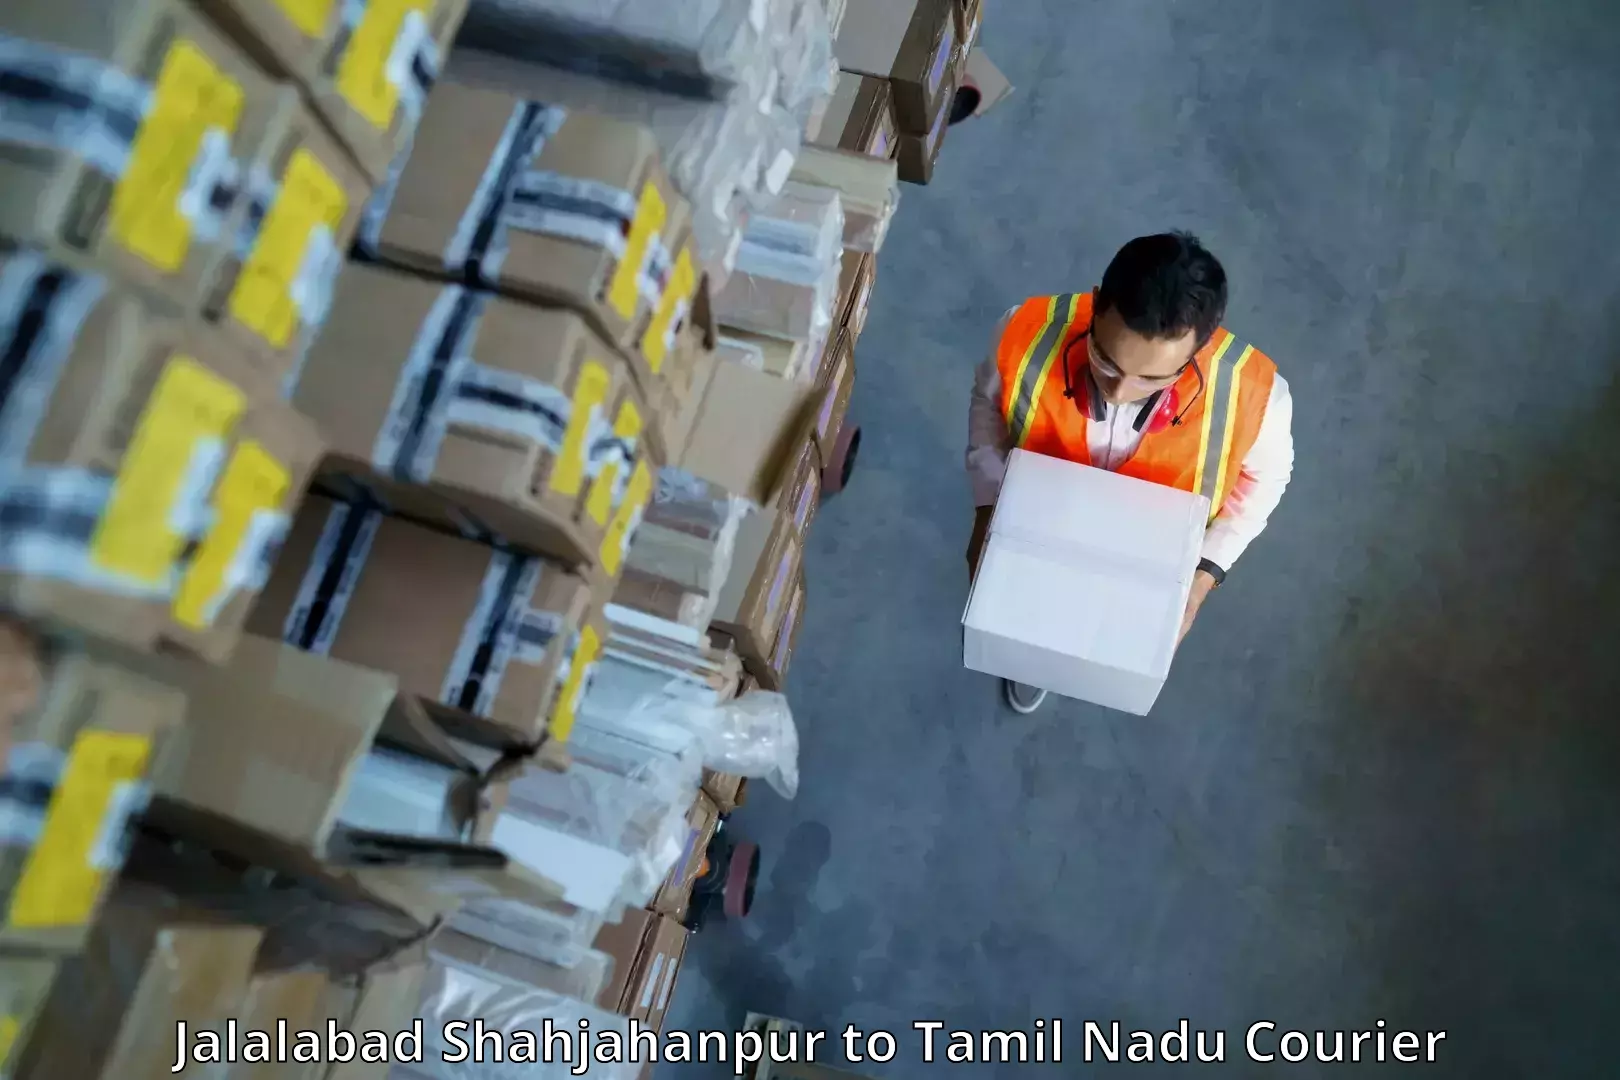 Reliable courier service Jalalabad Shahjahanpur to Sri Ramachandra Institute of Higher Education and Research Chennai